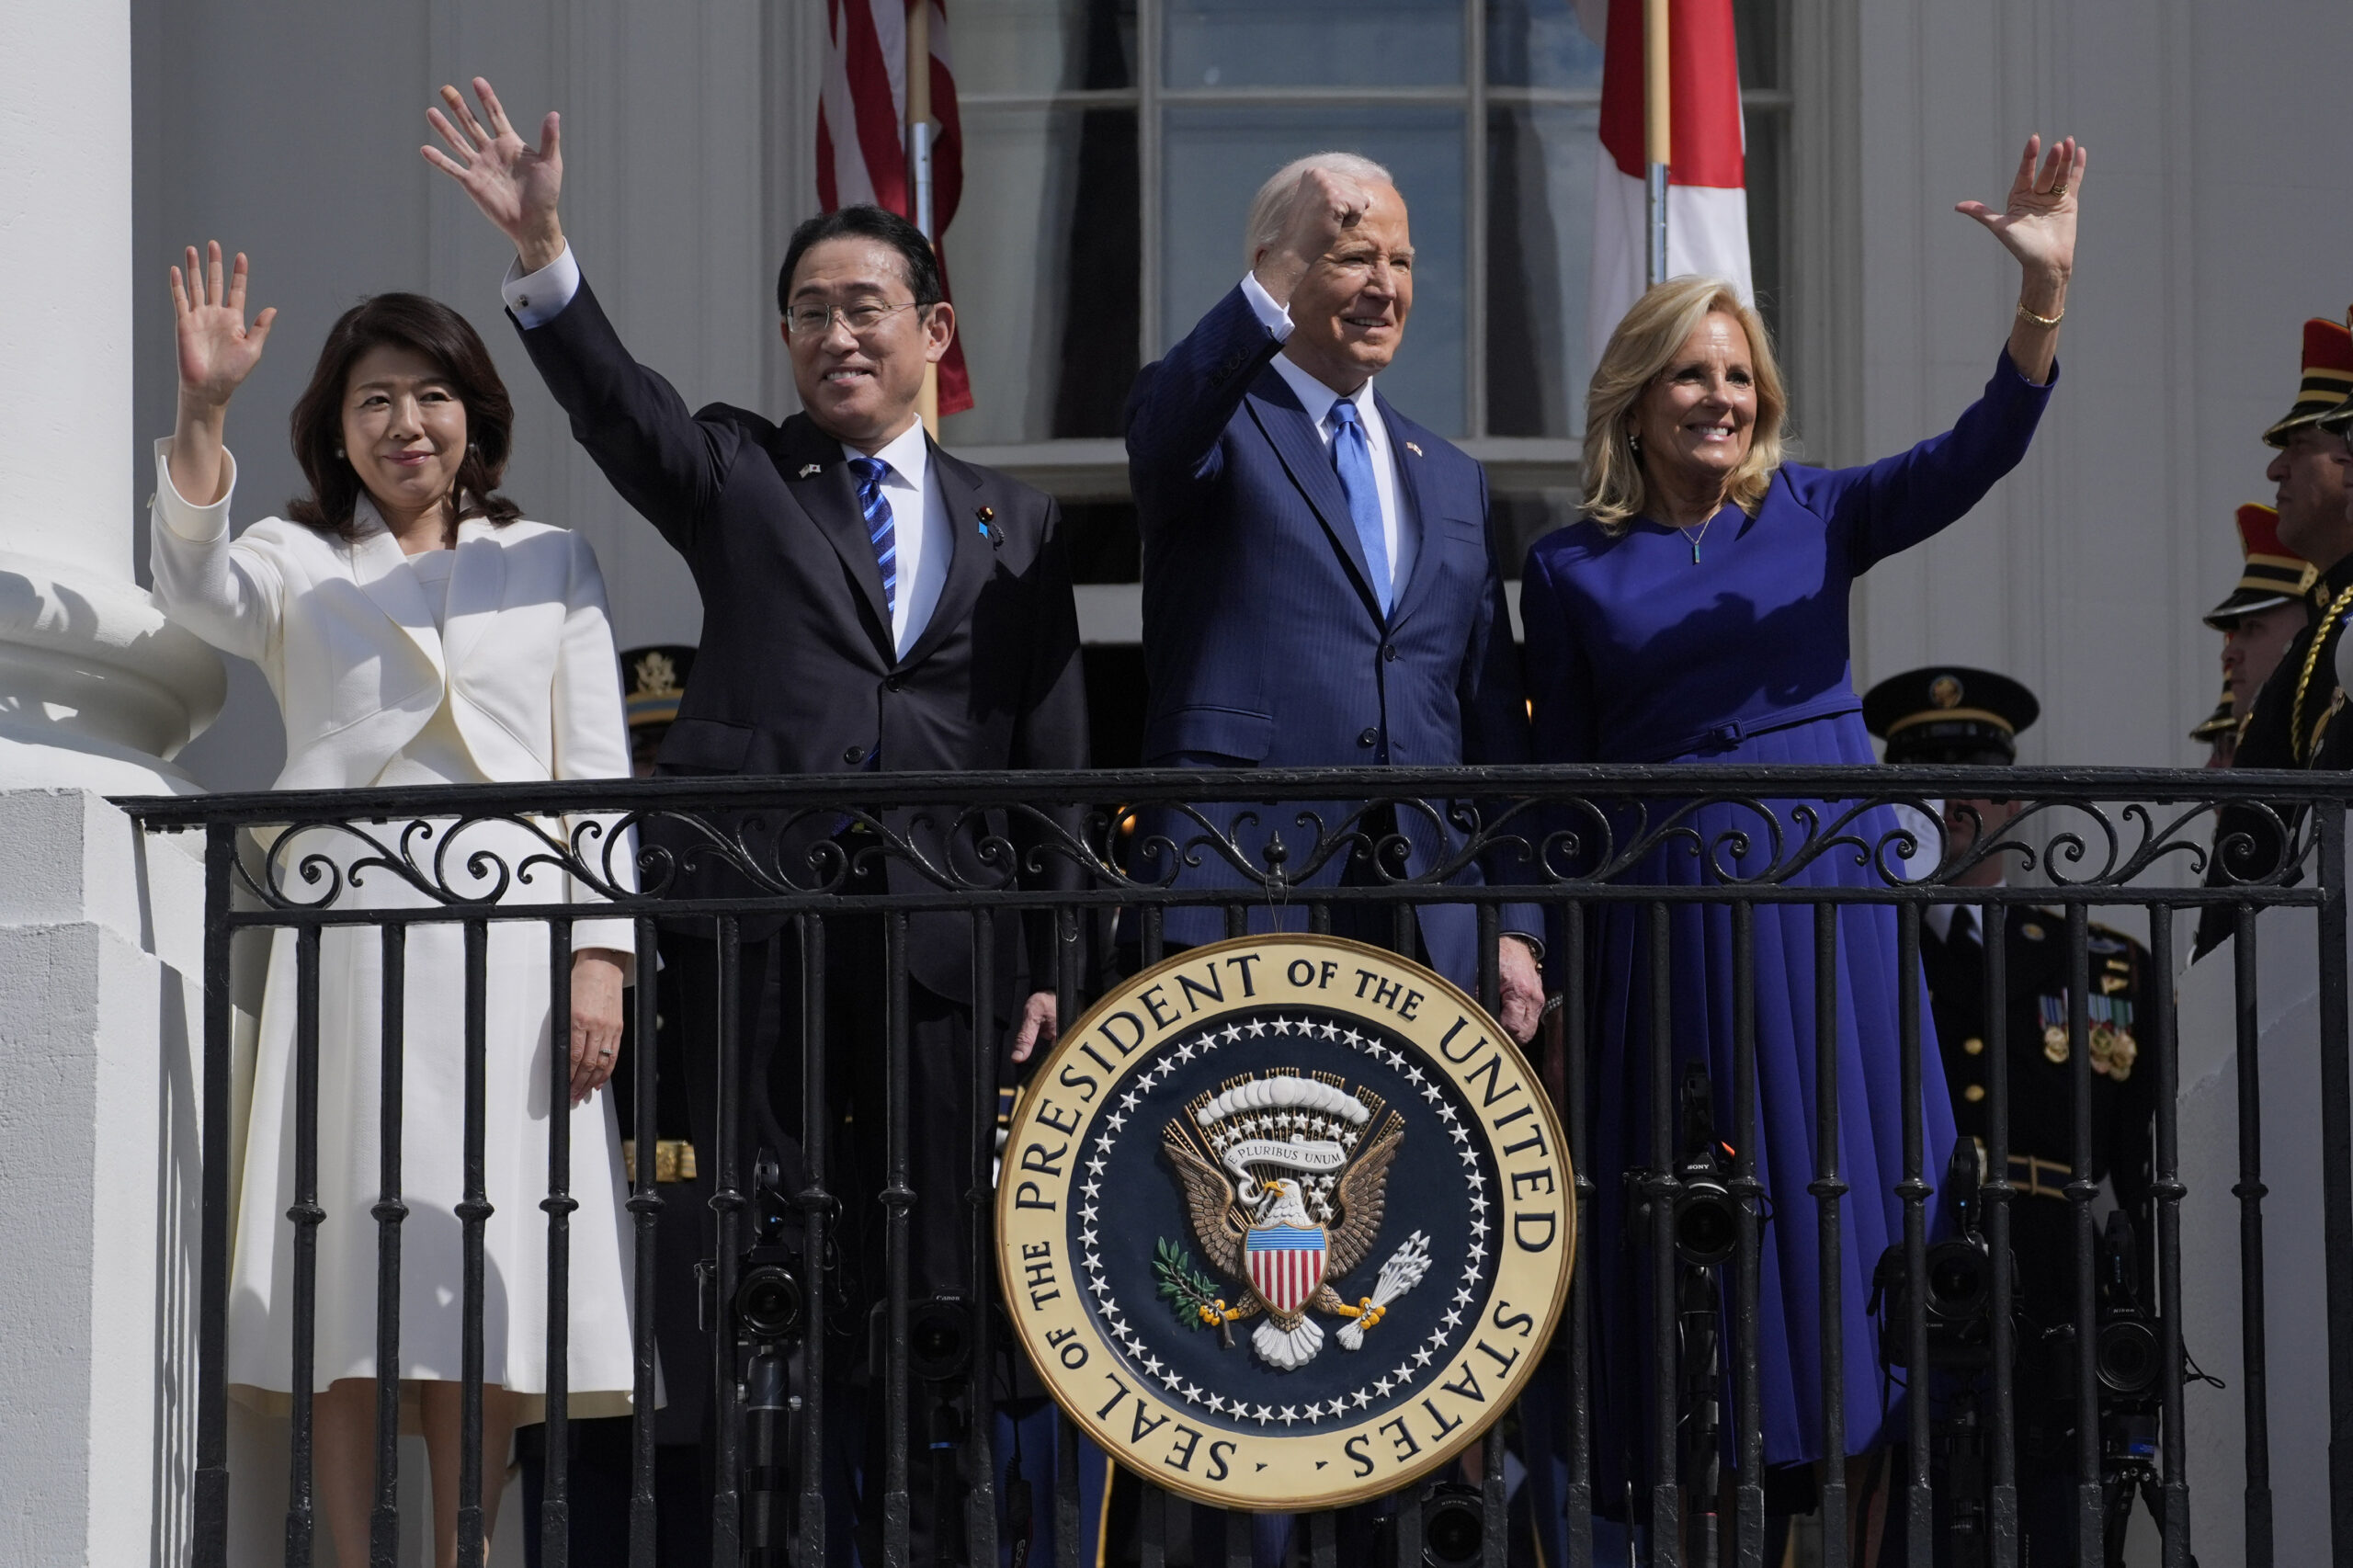 President Joe Biden and first lady Jill Biden wave from the Blue Room Balcony with Japanese Prime Minister Fumio Kishida and his wife Yuko Kishida during a State Arrival Ceremony on the South Lawn of the White House, Wednesday, April 10, 2024, in Washington. (AP Photo/Evan Vucci)